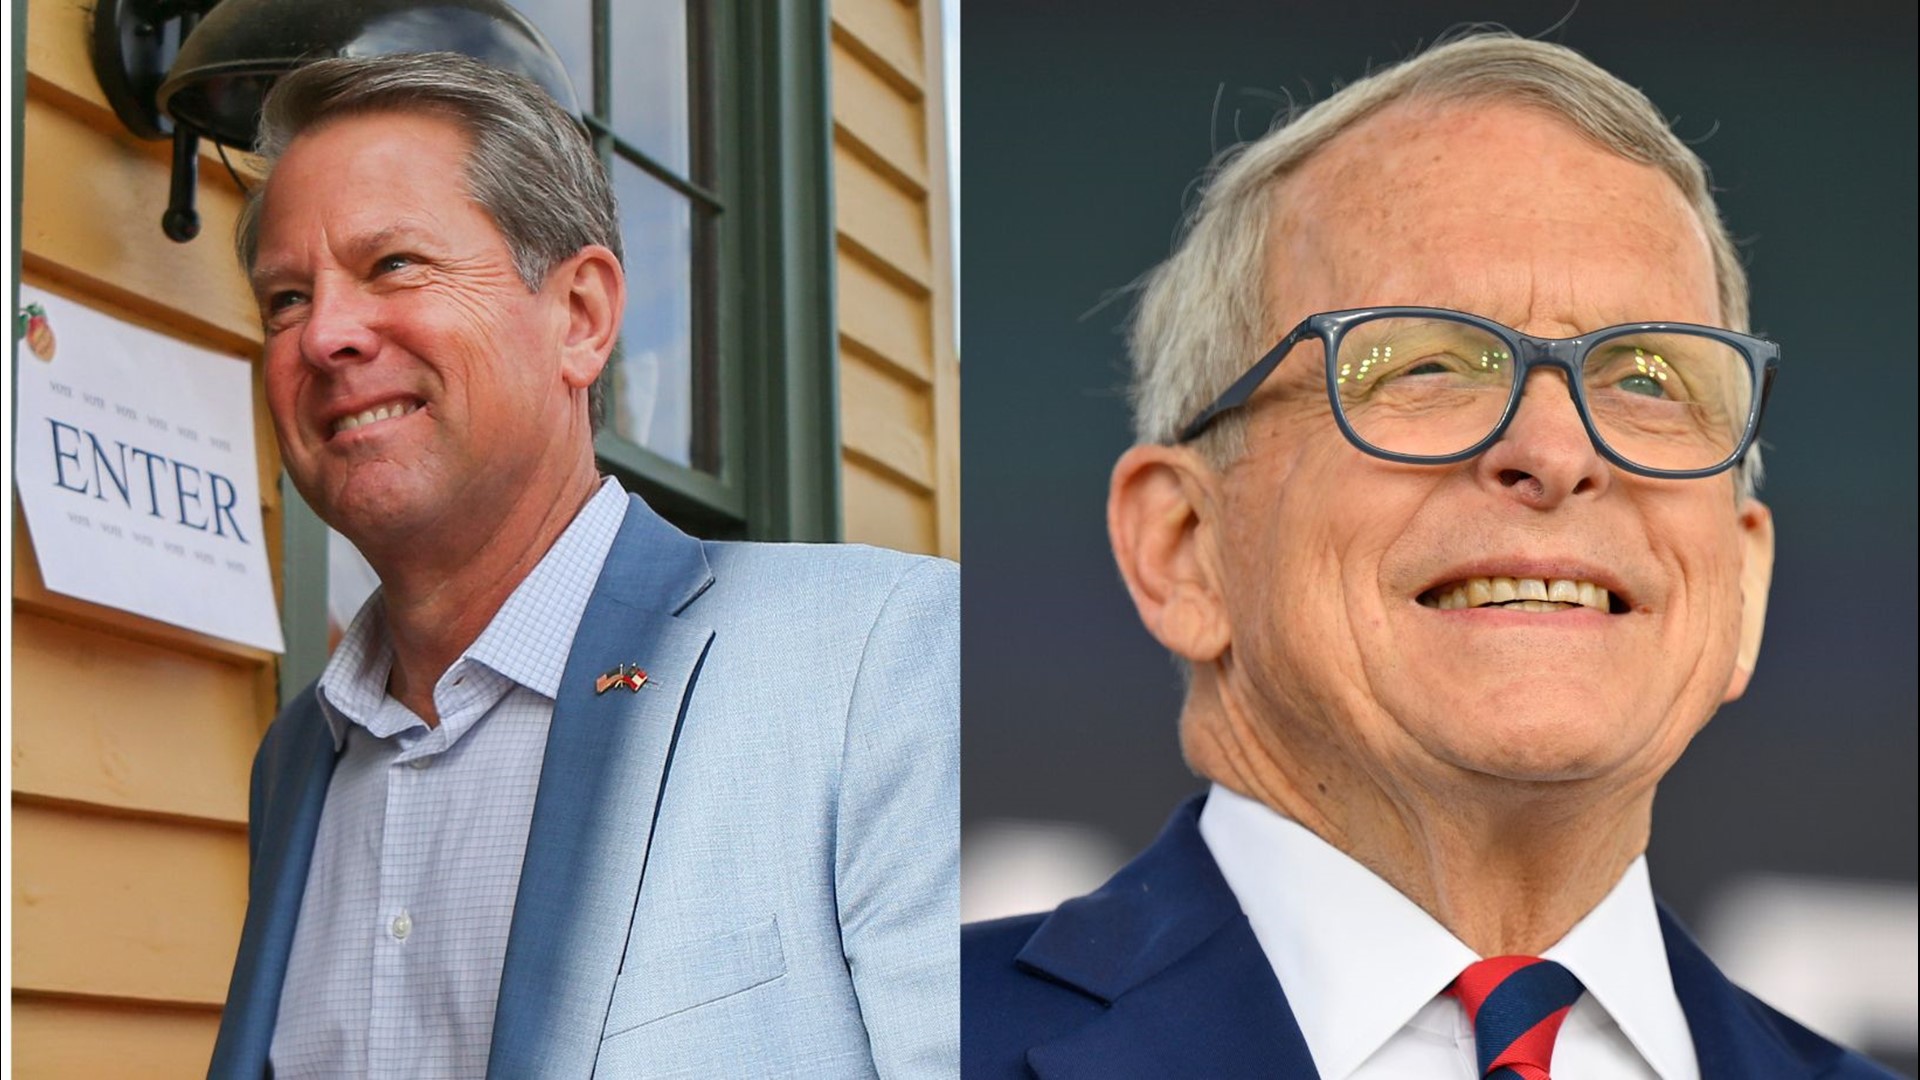 Ohio Governor Mike DeWine and Georgia Governor Brian Kemp first announced the bet for their team to win at the Chick-fil-A Peach Bowl on Twitter.